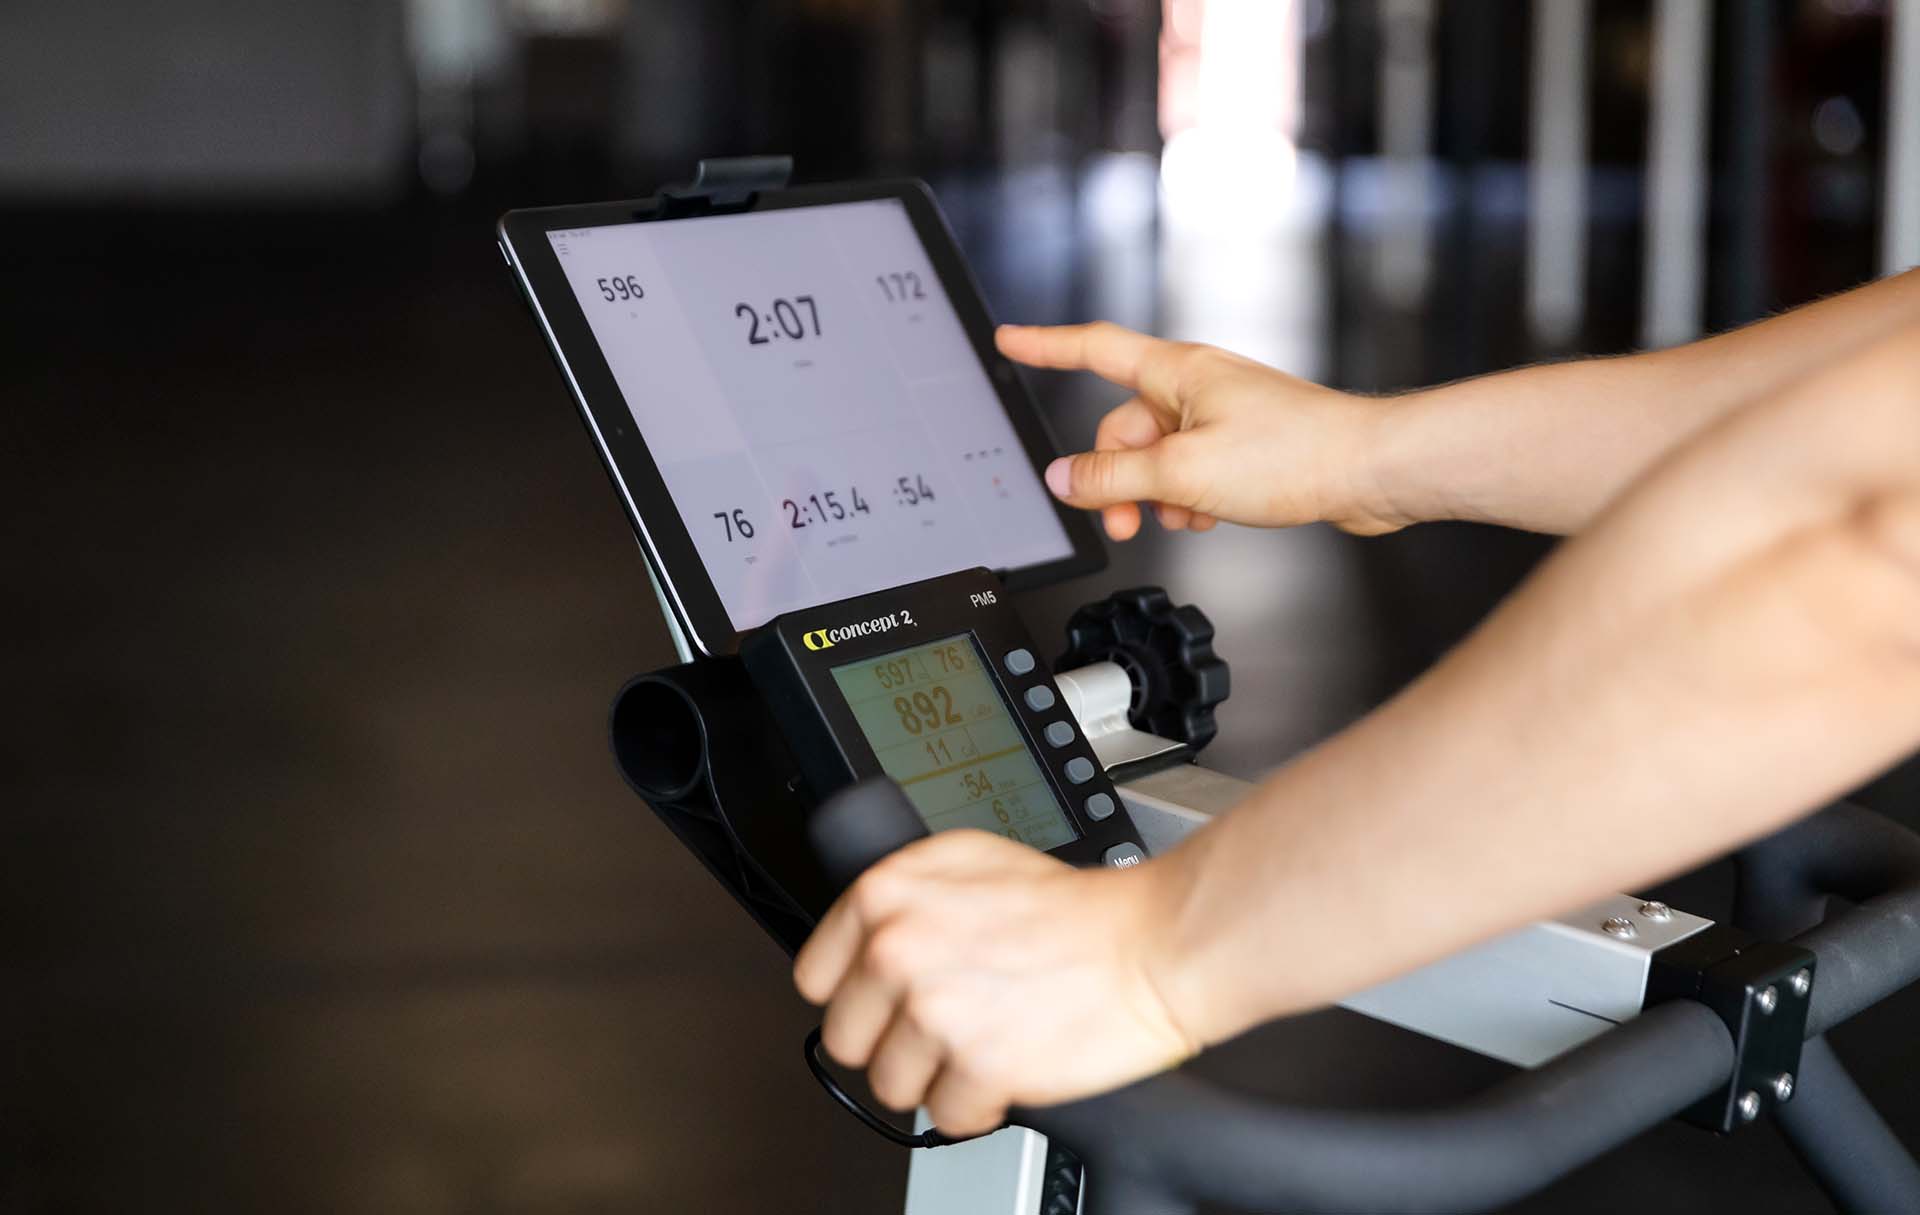 BikeErg performance monitor, shown with tablet